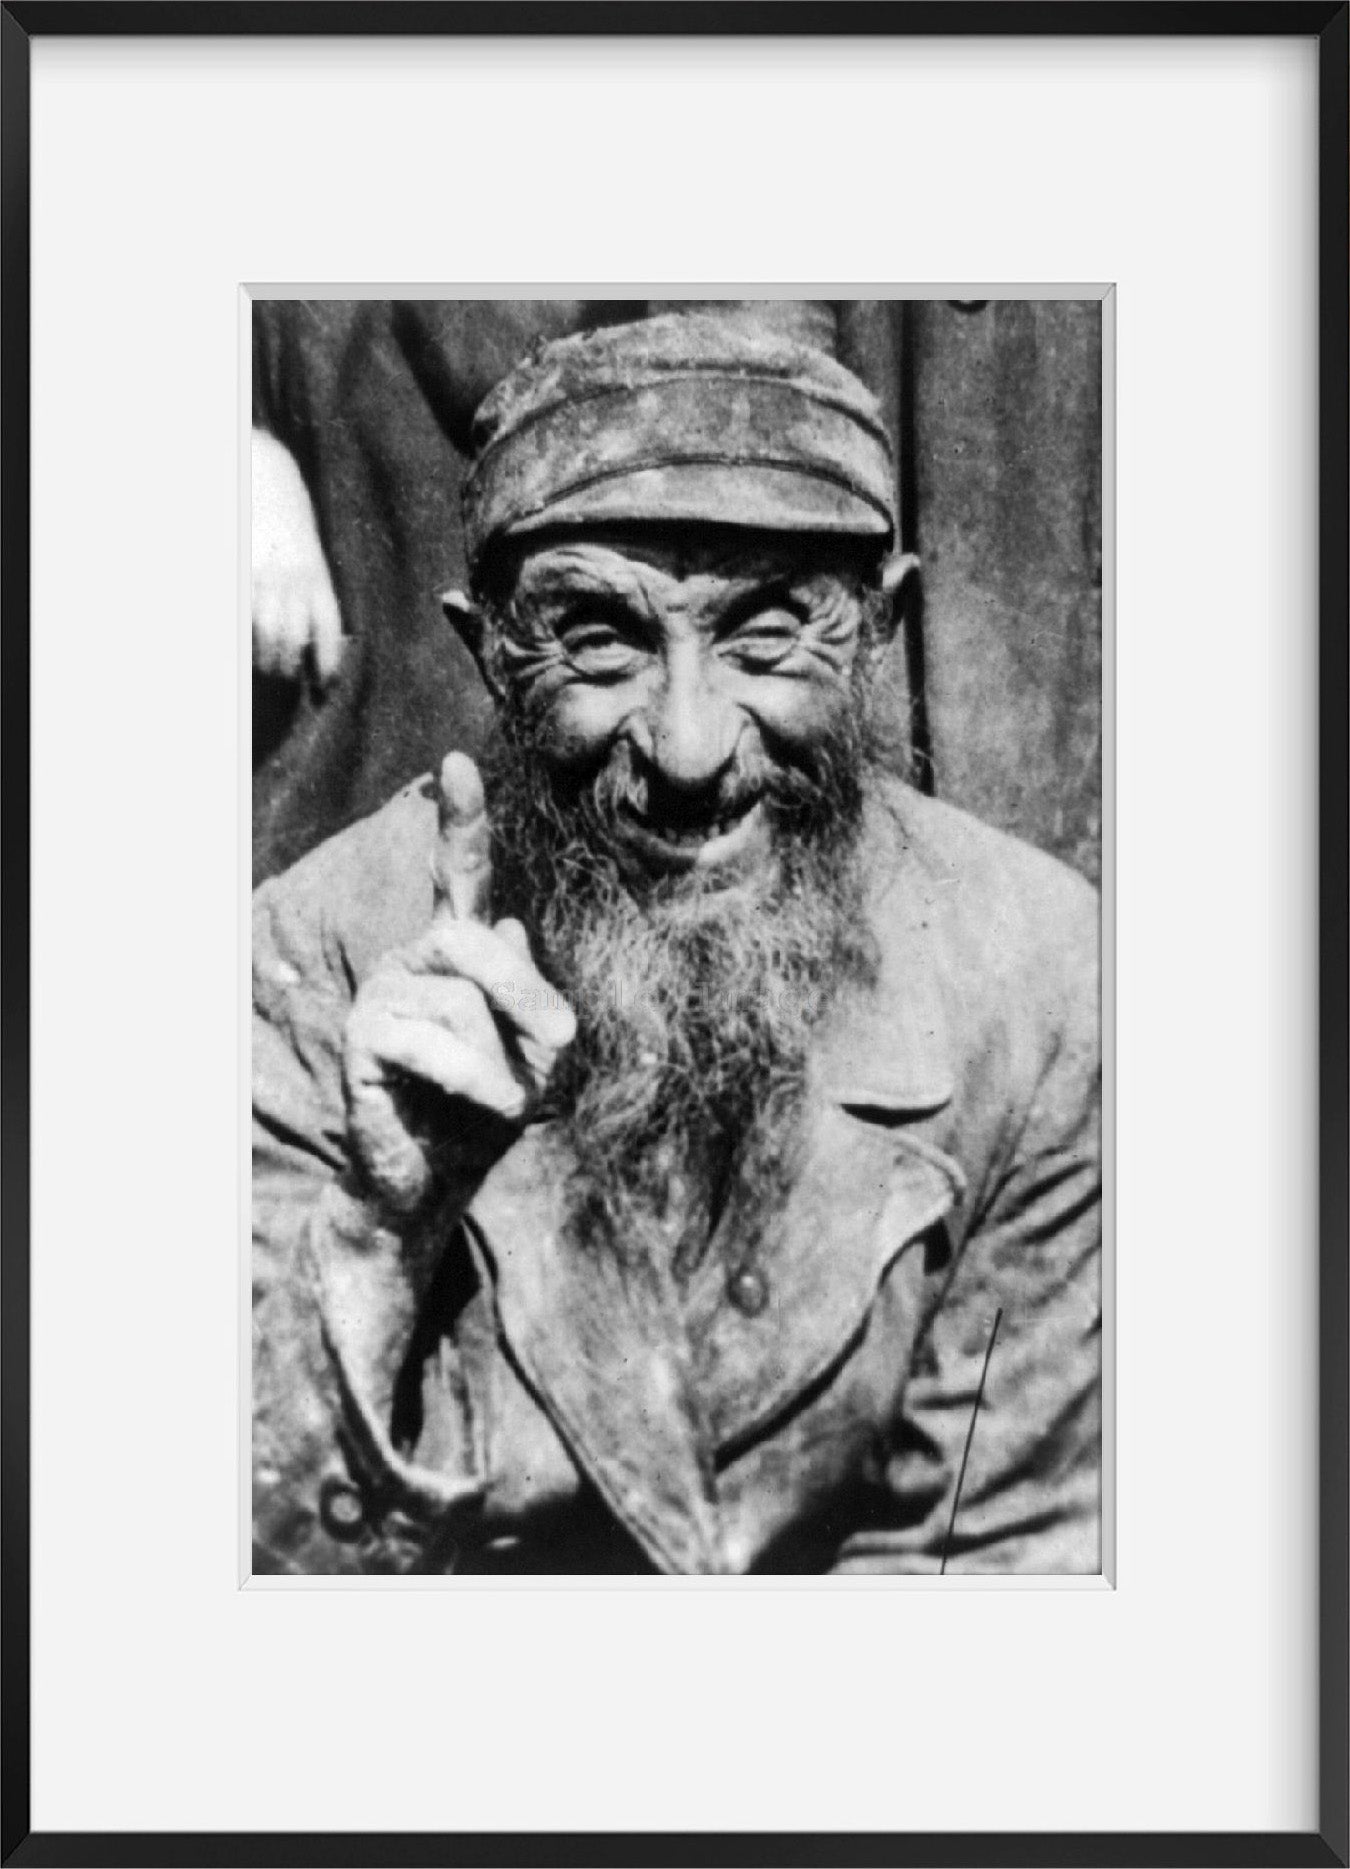 193-? photograph of Galician Jew Summary: Head and shoulders portrait of grinnin